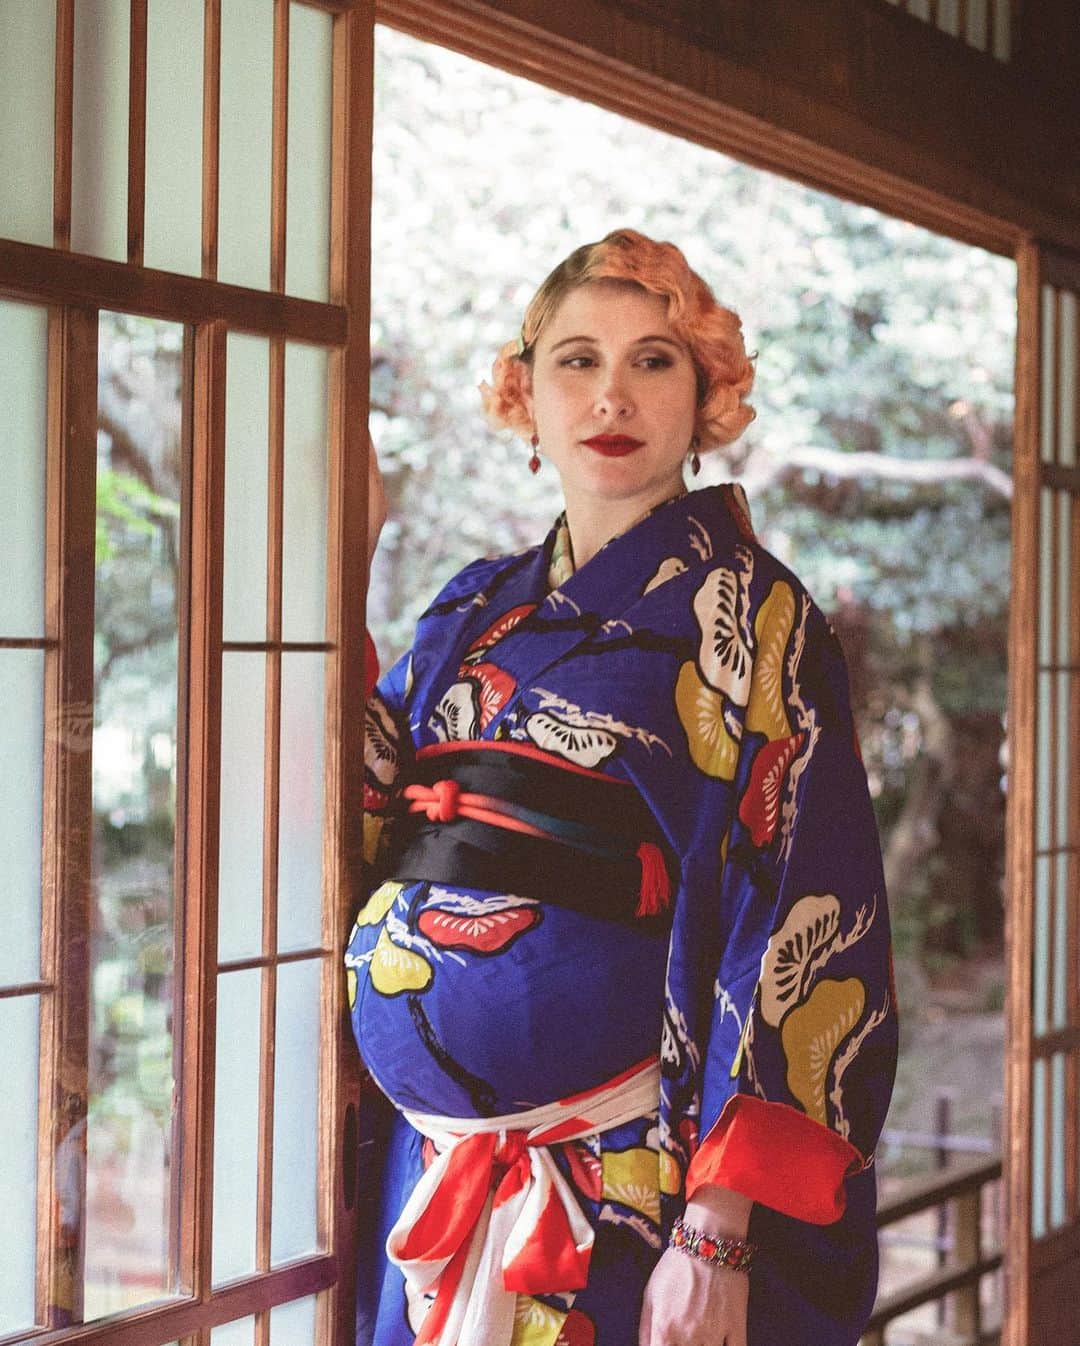 Anji SALZのインスタグラム：「While I’m hanging around at home nursing little Salz in jogging pants and my hubby’s old shirt - let me share a few more pictures from my maternity shoot with @benjamin_hung 😆🥰🎊 Since kimono has a straight silhouette I was really struggling on how to dress that the bump would be visible 😂 Tying a shigoki below my belly did the trick 🥳☺️」